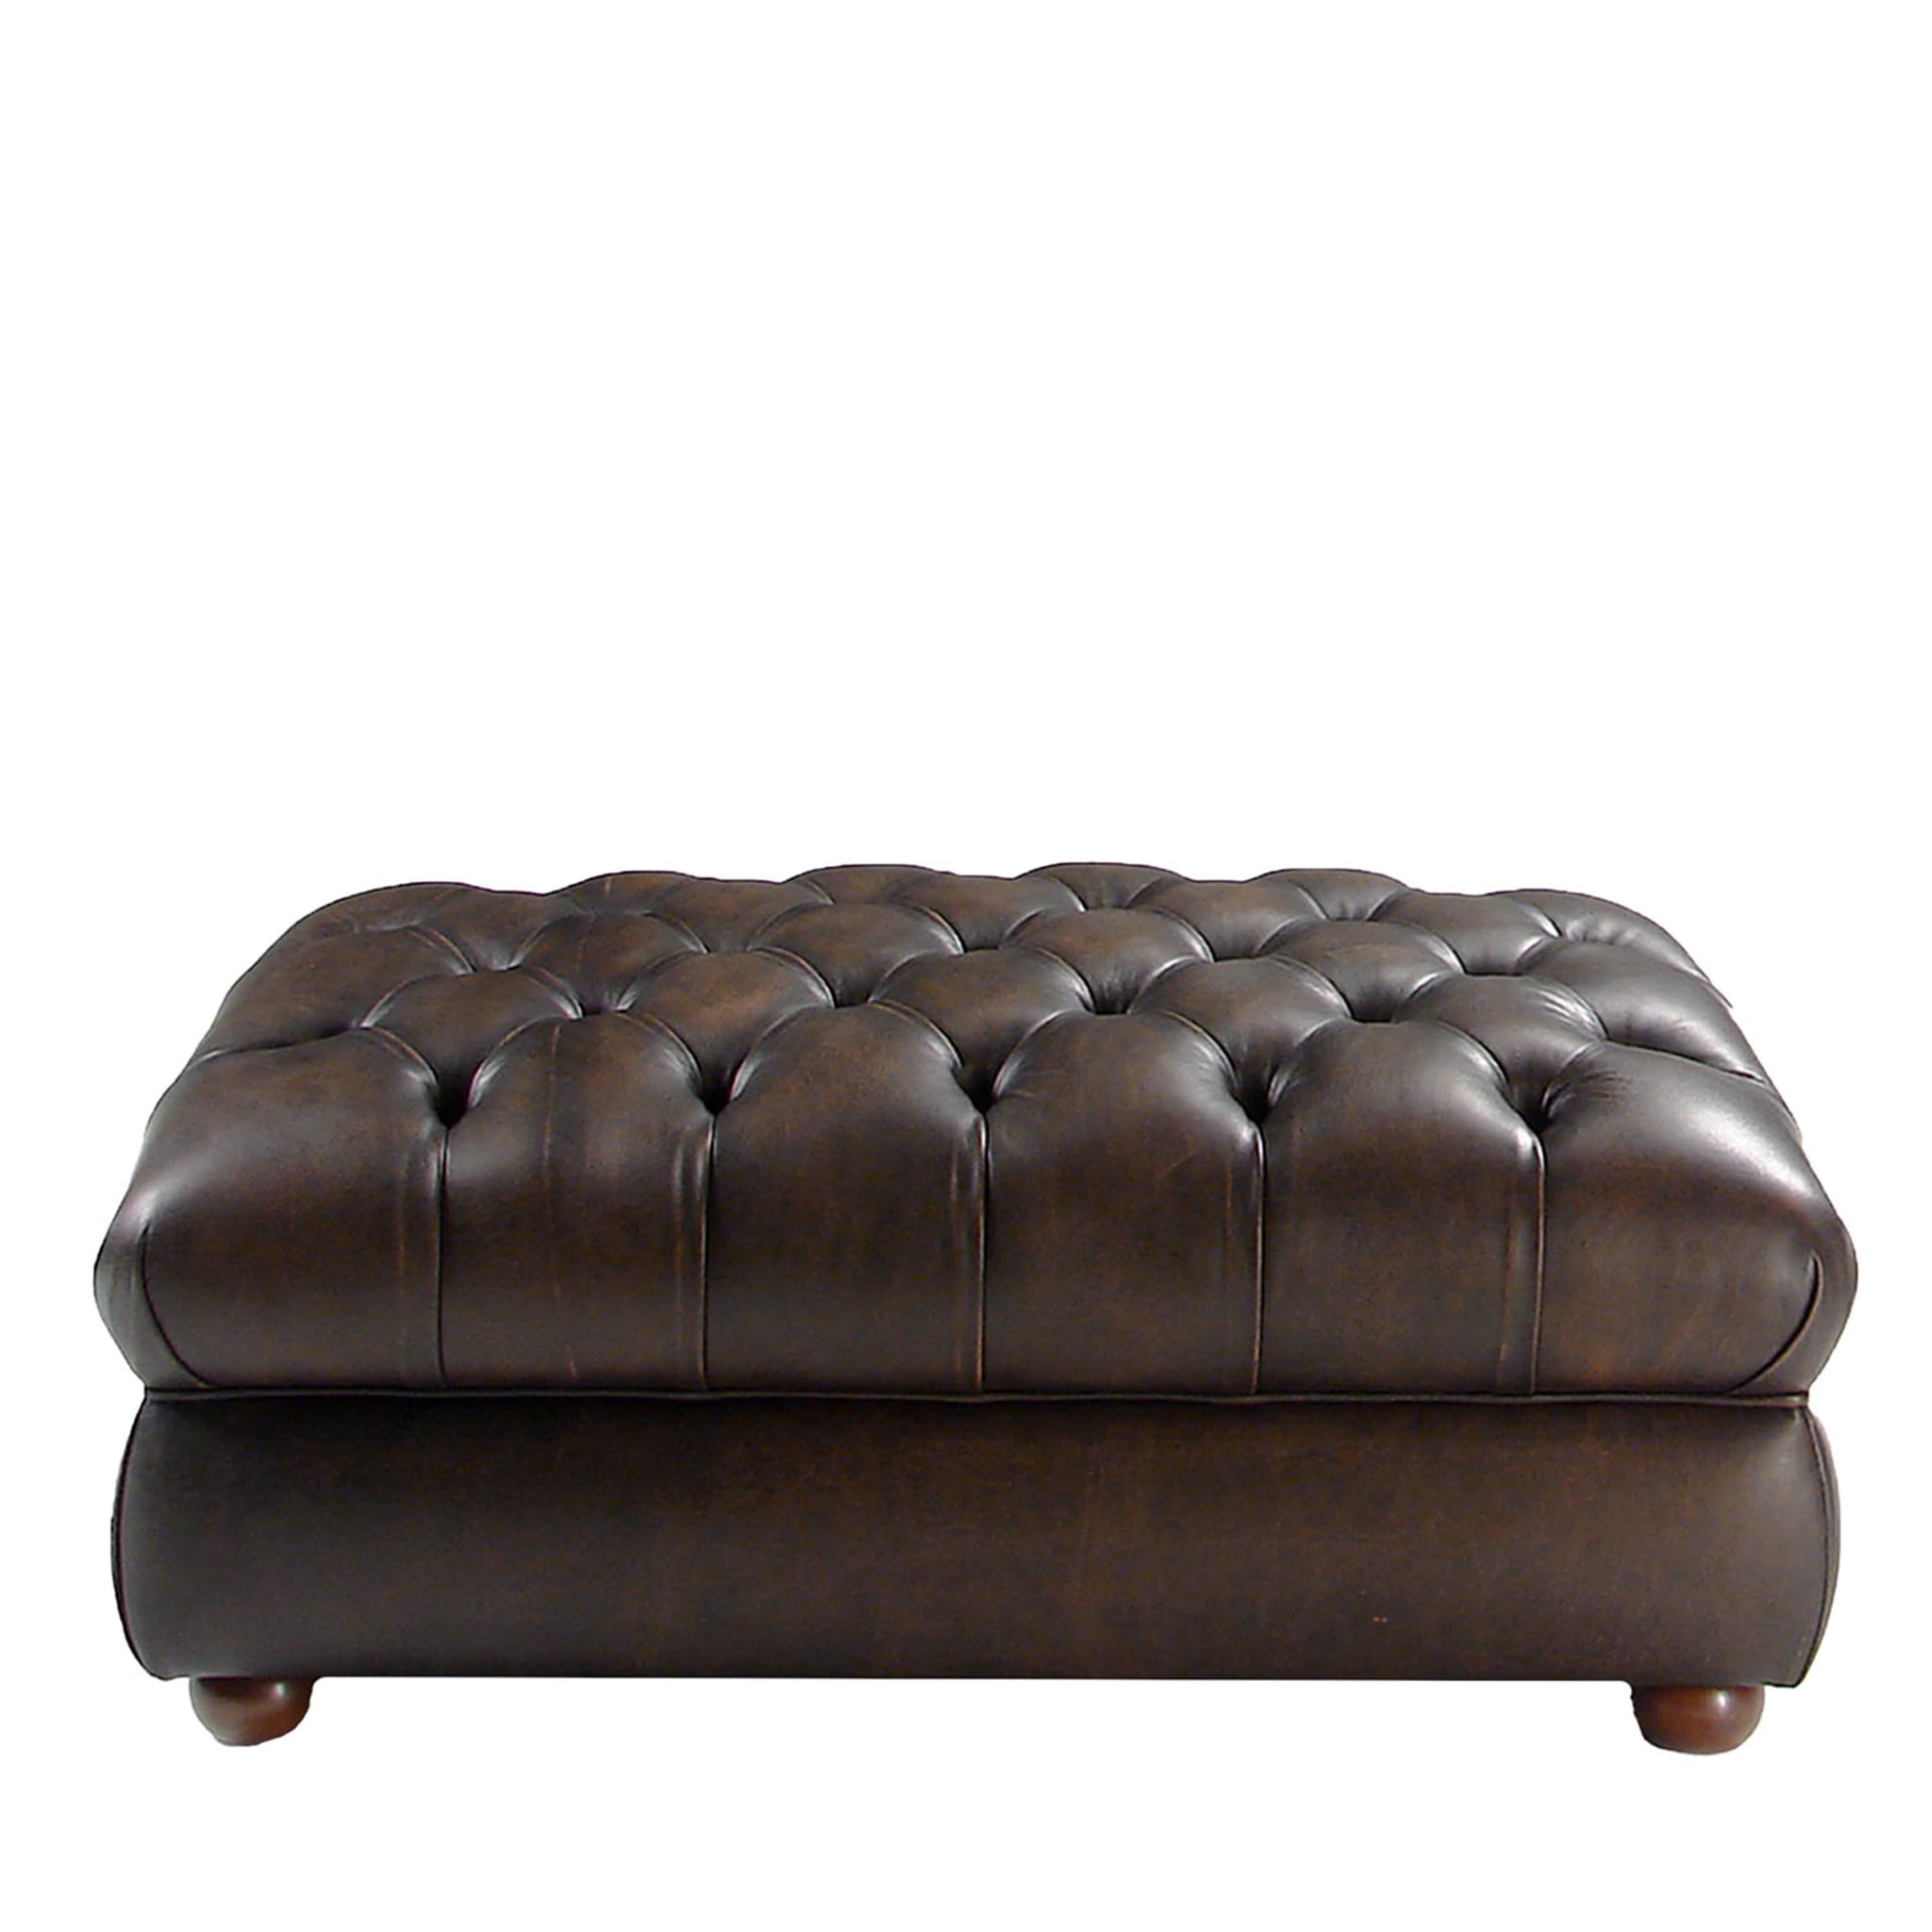 Chesterfield Brown Leather Pouf - Main view